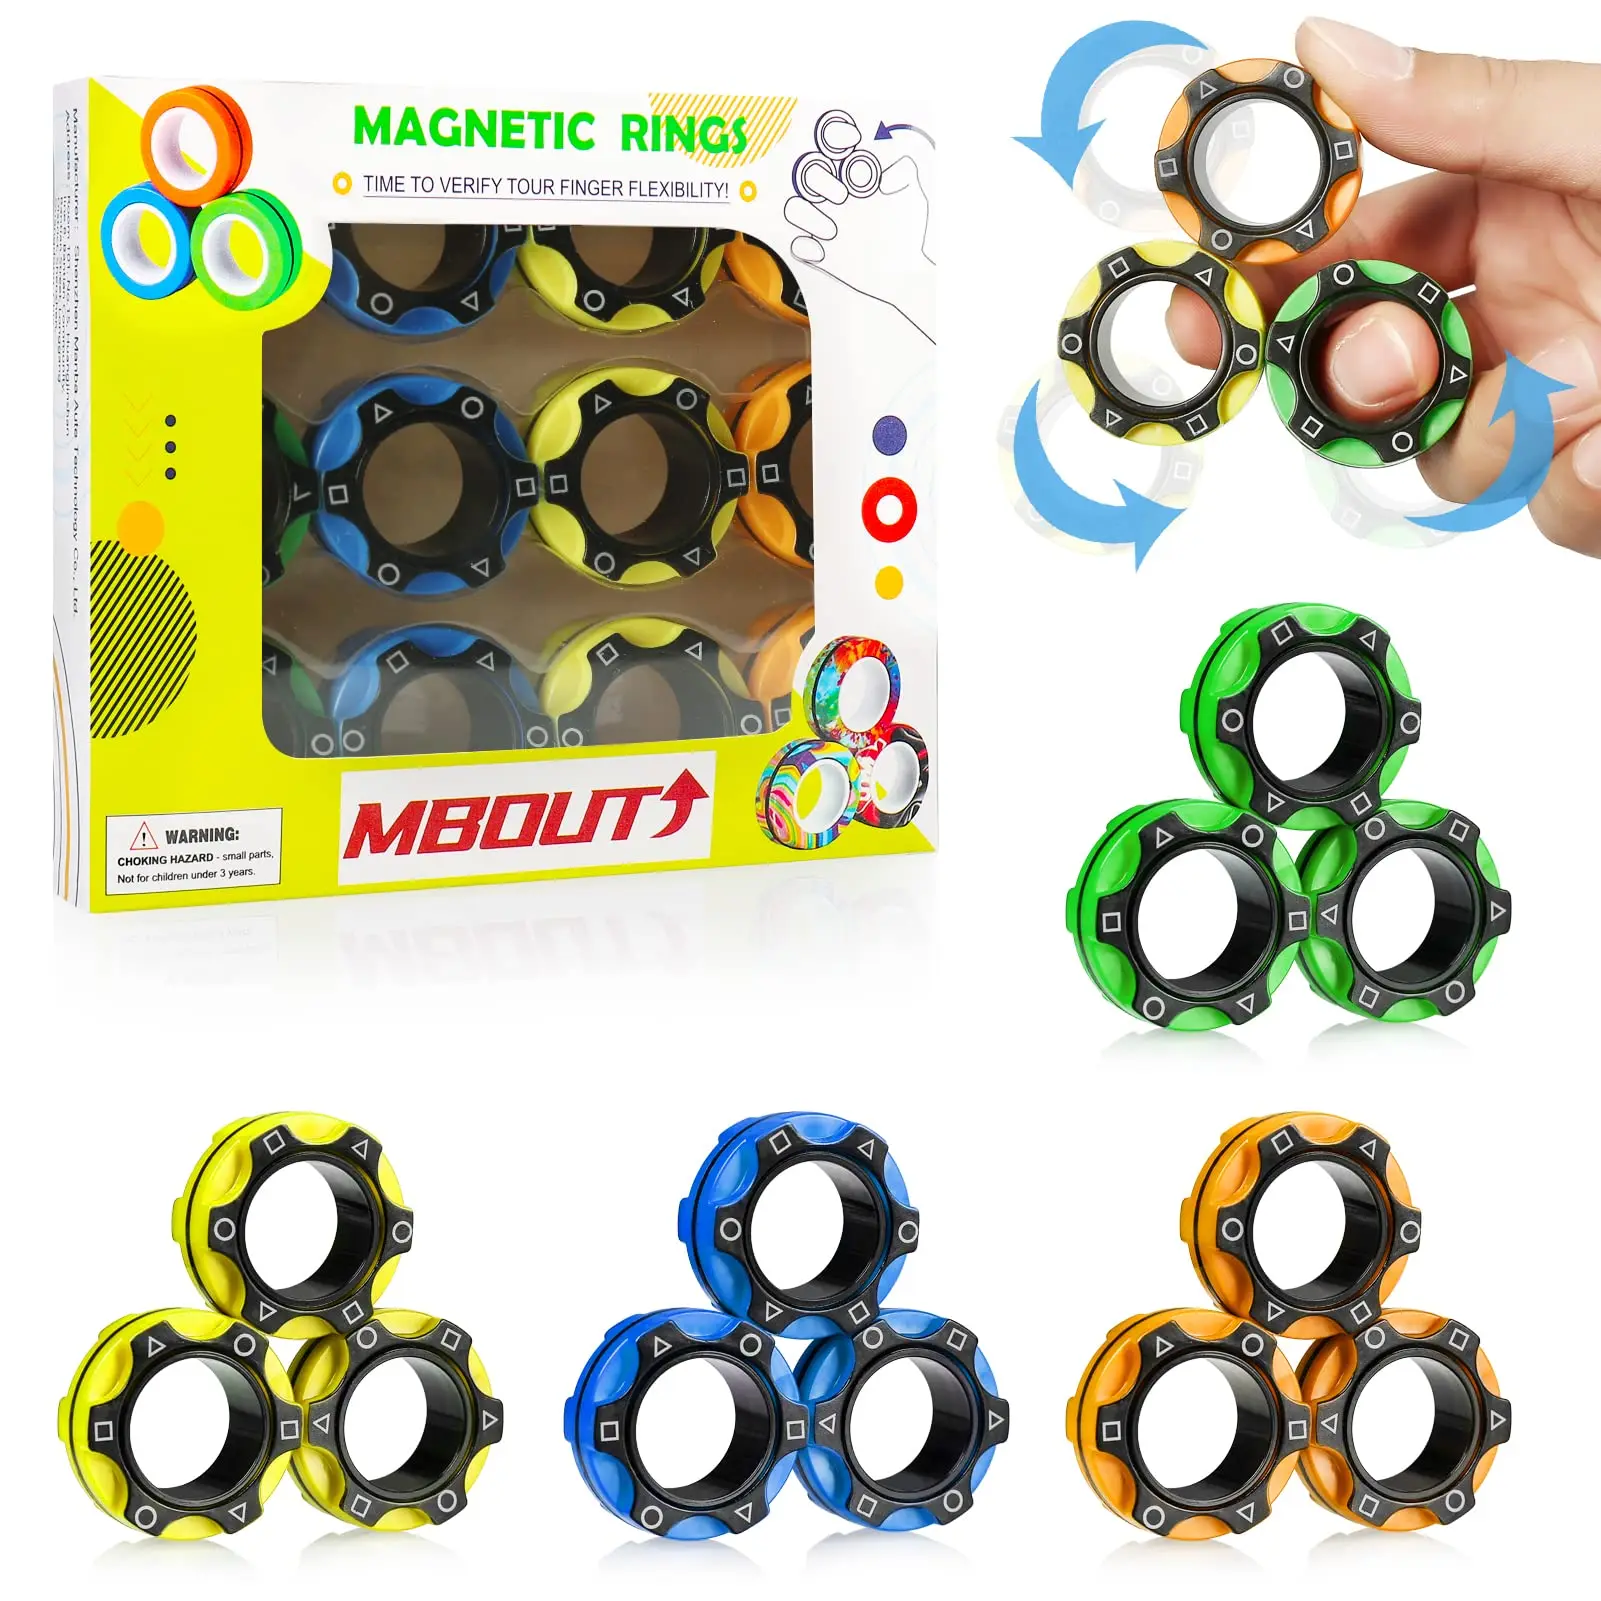 Graffiti Camo Fingers Magnet Rings ADHD Stress Relief Magical Toys for Training Relieves Autism Anxiety MBOUTrising 12Pcs Magnetic Ring Fidget Spinner Toys Set Great Gift for Adults Teens Kids 